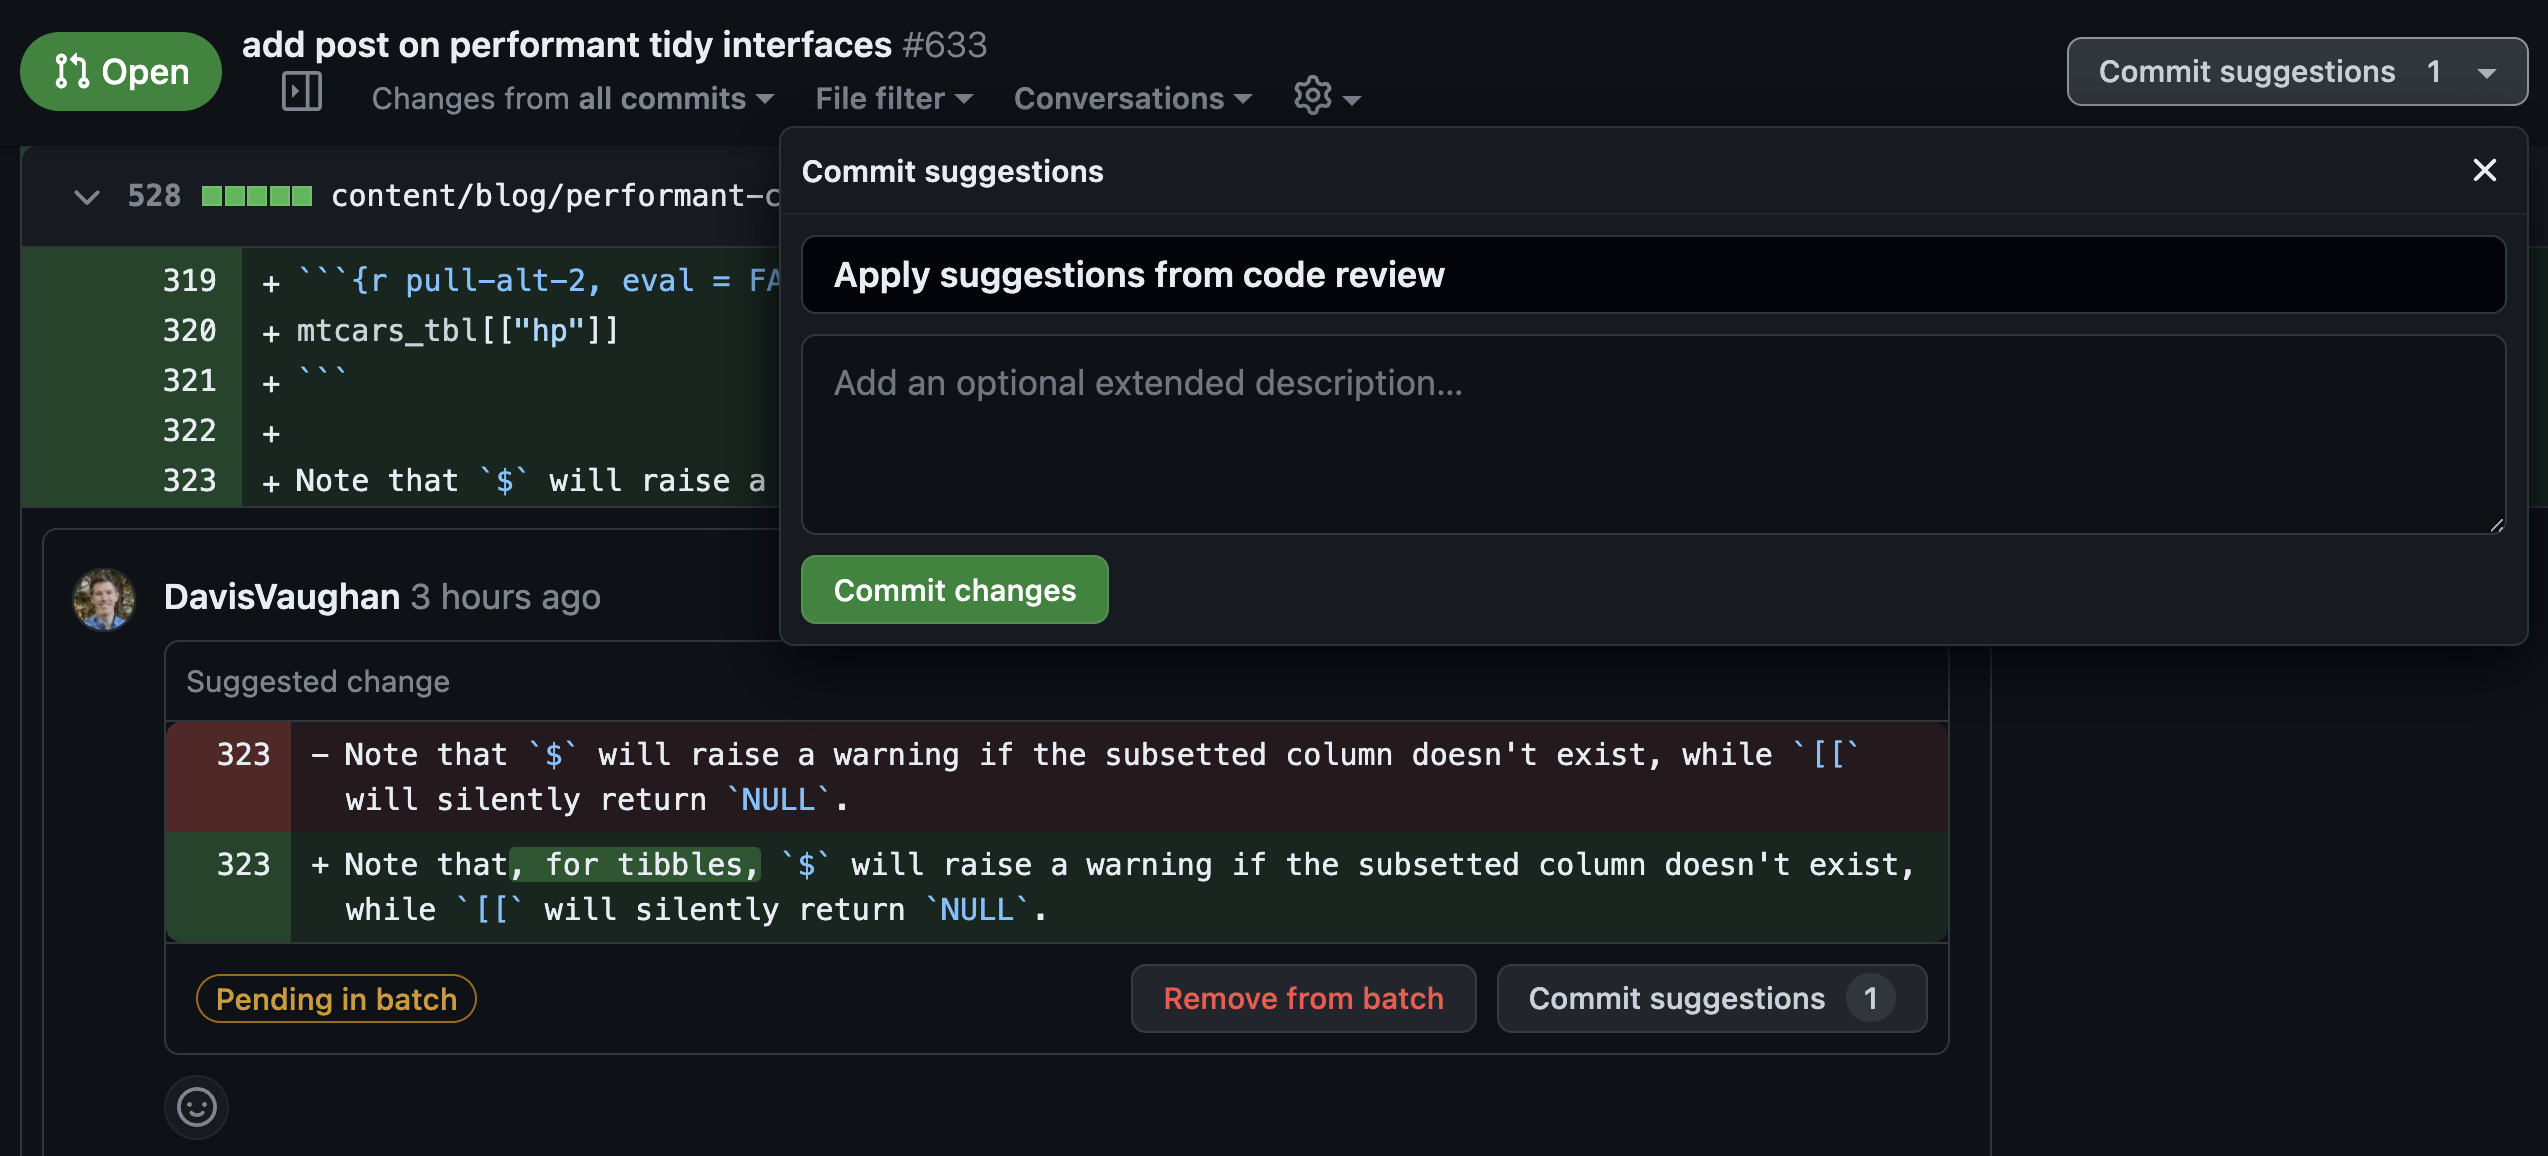 Screenshot of GitHub interface for committing suggestions open. User can supply a title and description and select the "Commit changes" button to apply multiple changes.